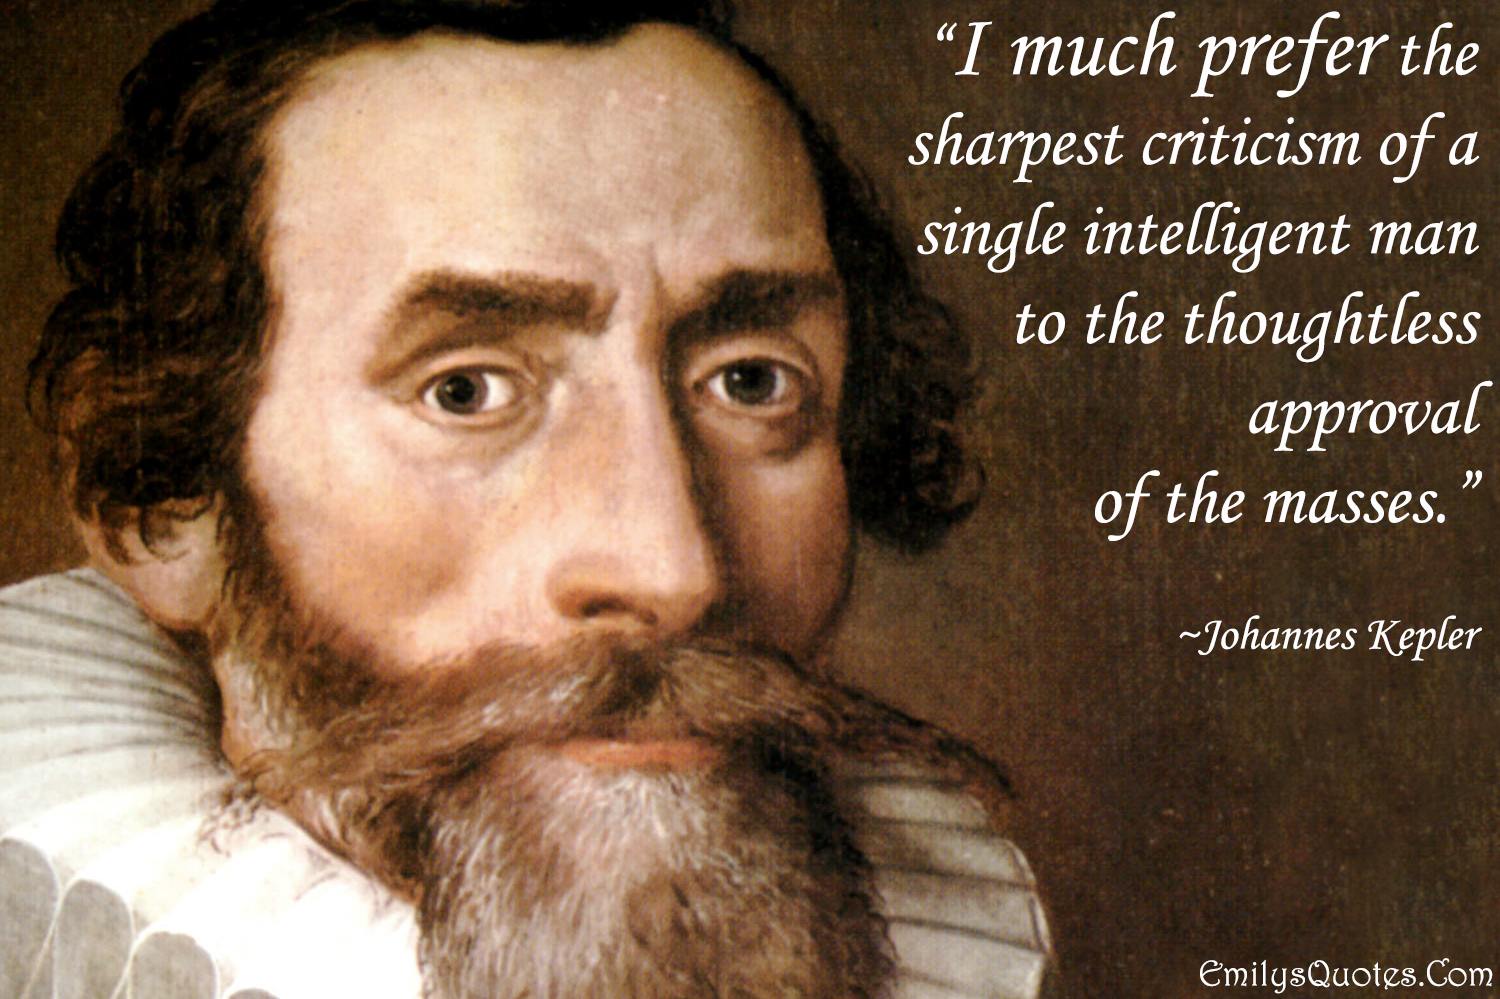 I much prefer the sharpest criticism of a single intelligent man to the thoughtless approval of the masses